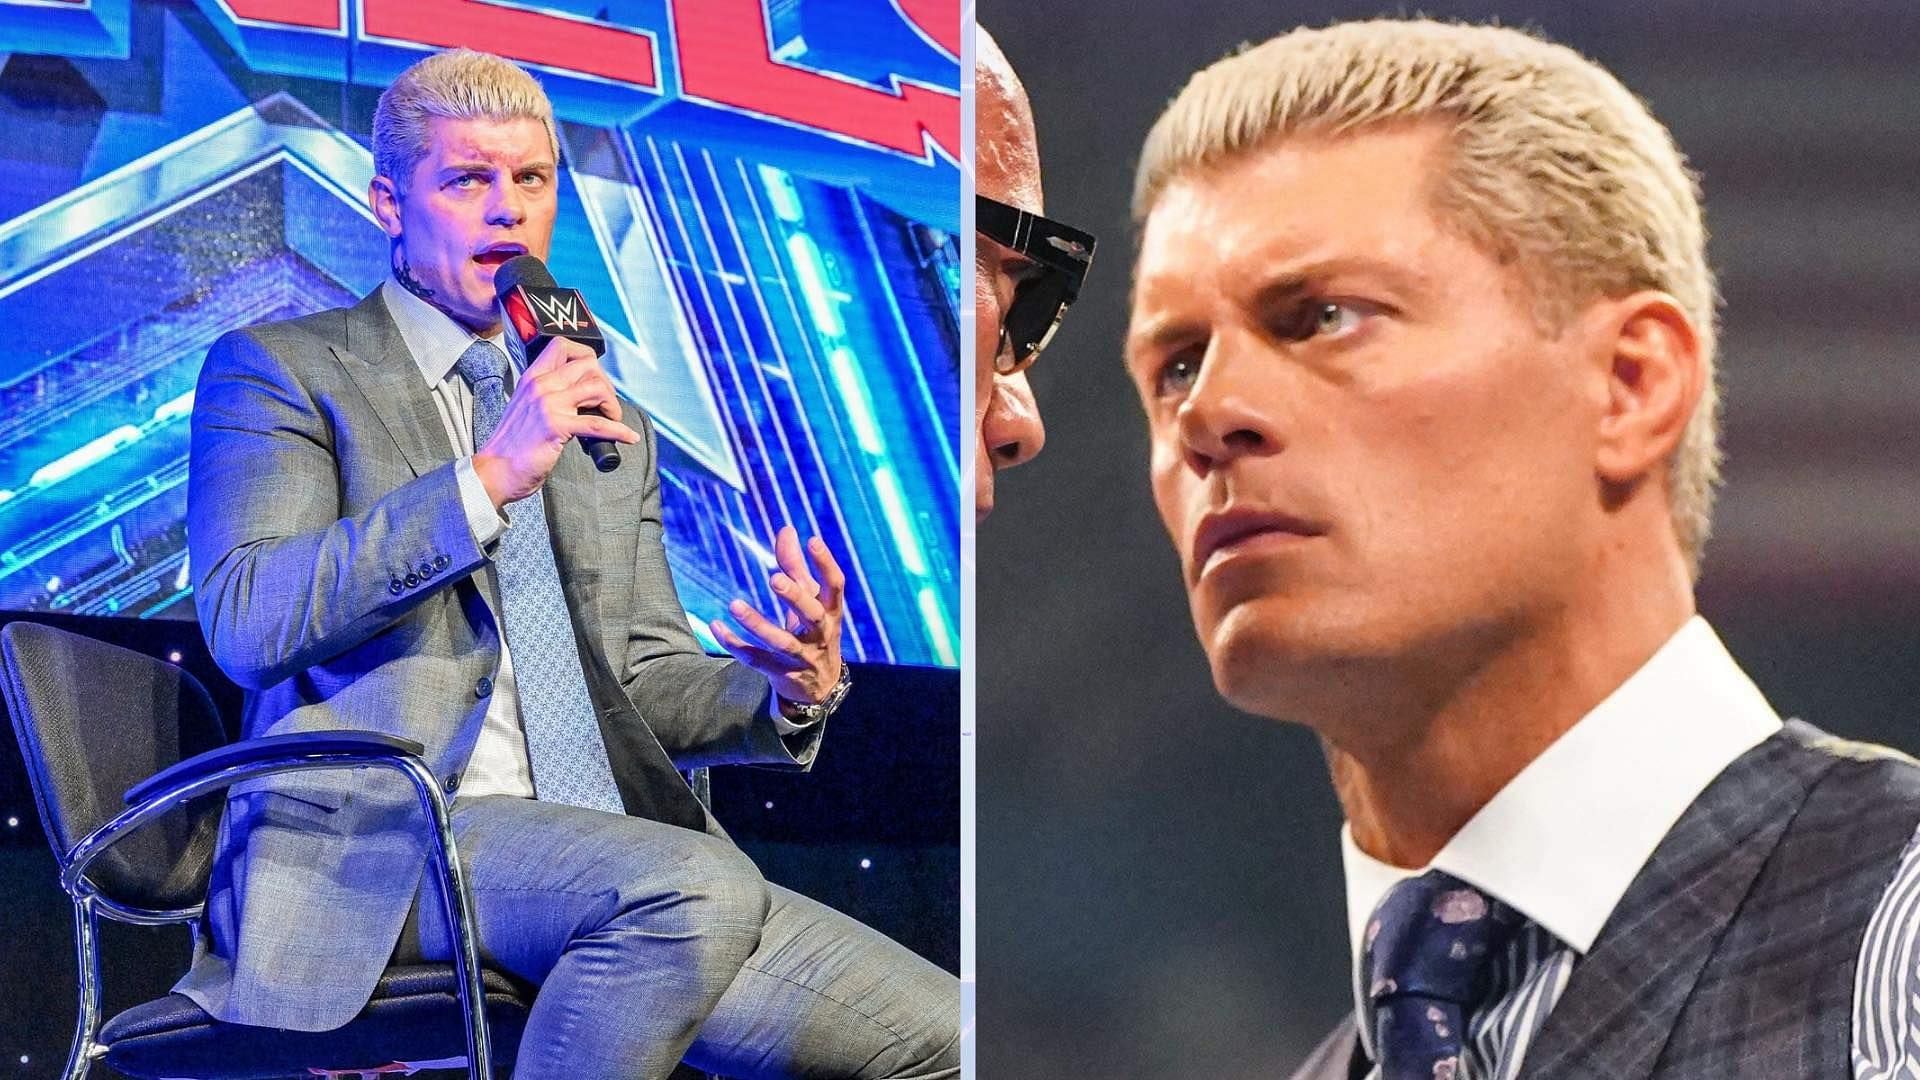 Cody Rhodes might be confronted by a former champion this week (source: WWE)